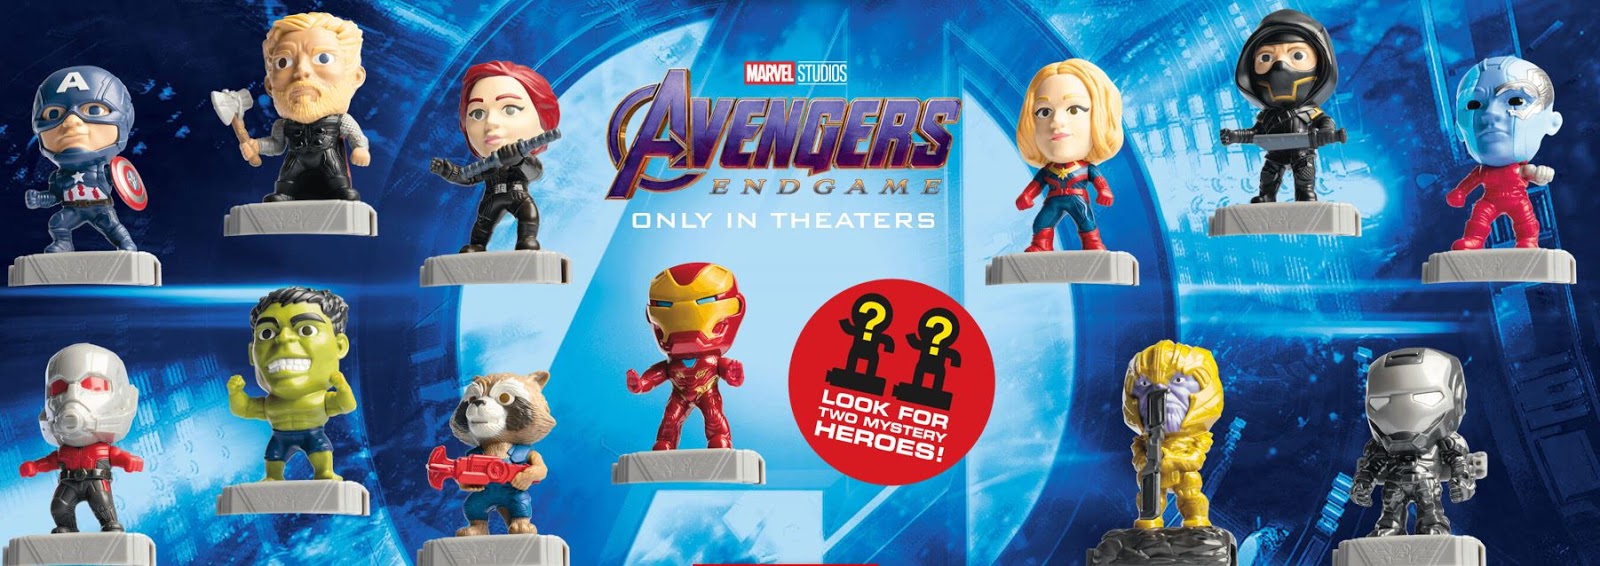 McDONALD's 2019 MARVEL AVENGERS END GAME Happy Meal Toy Mystery 23 24 8 differen 